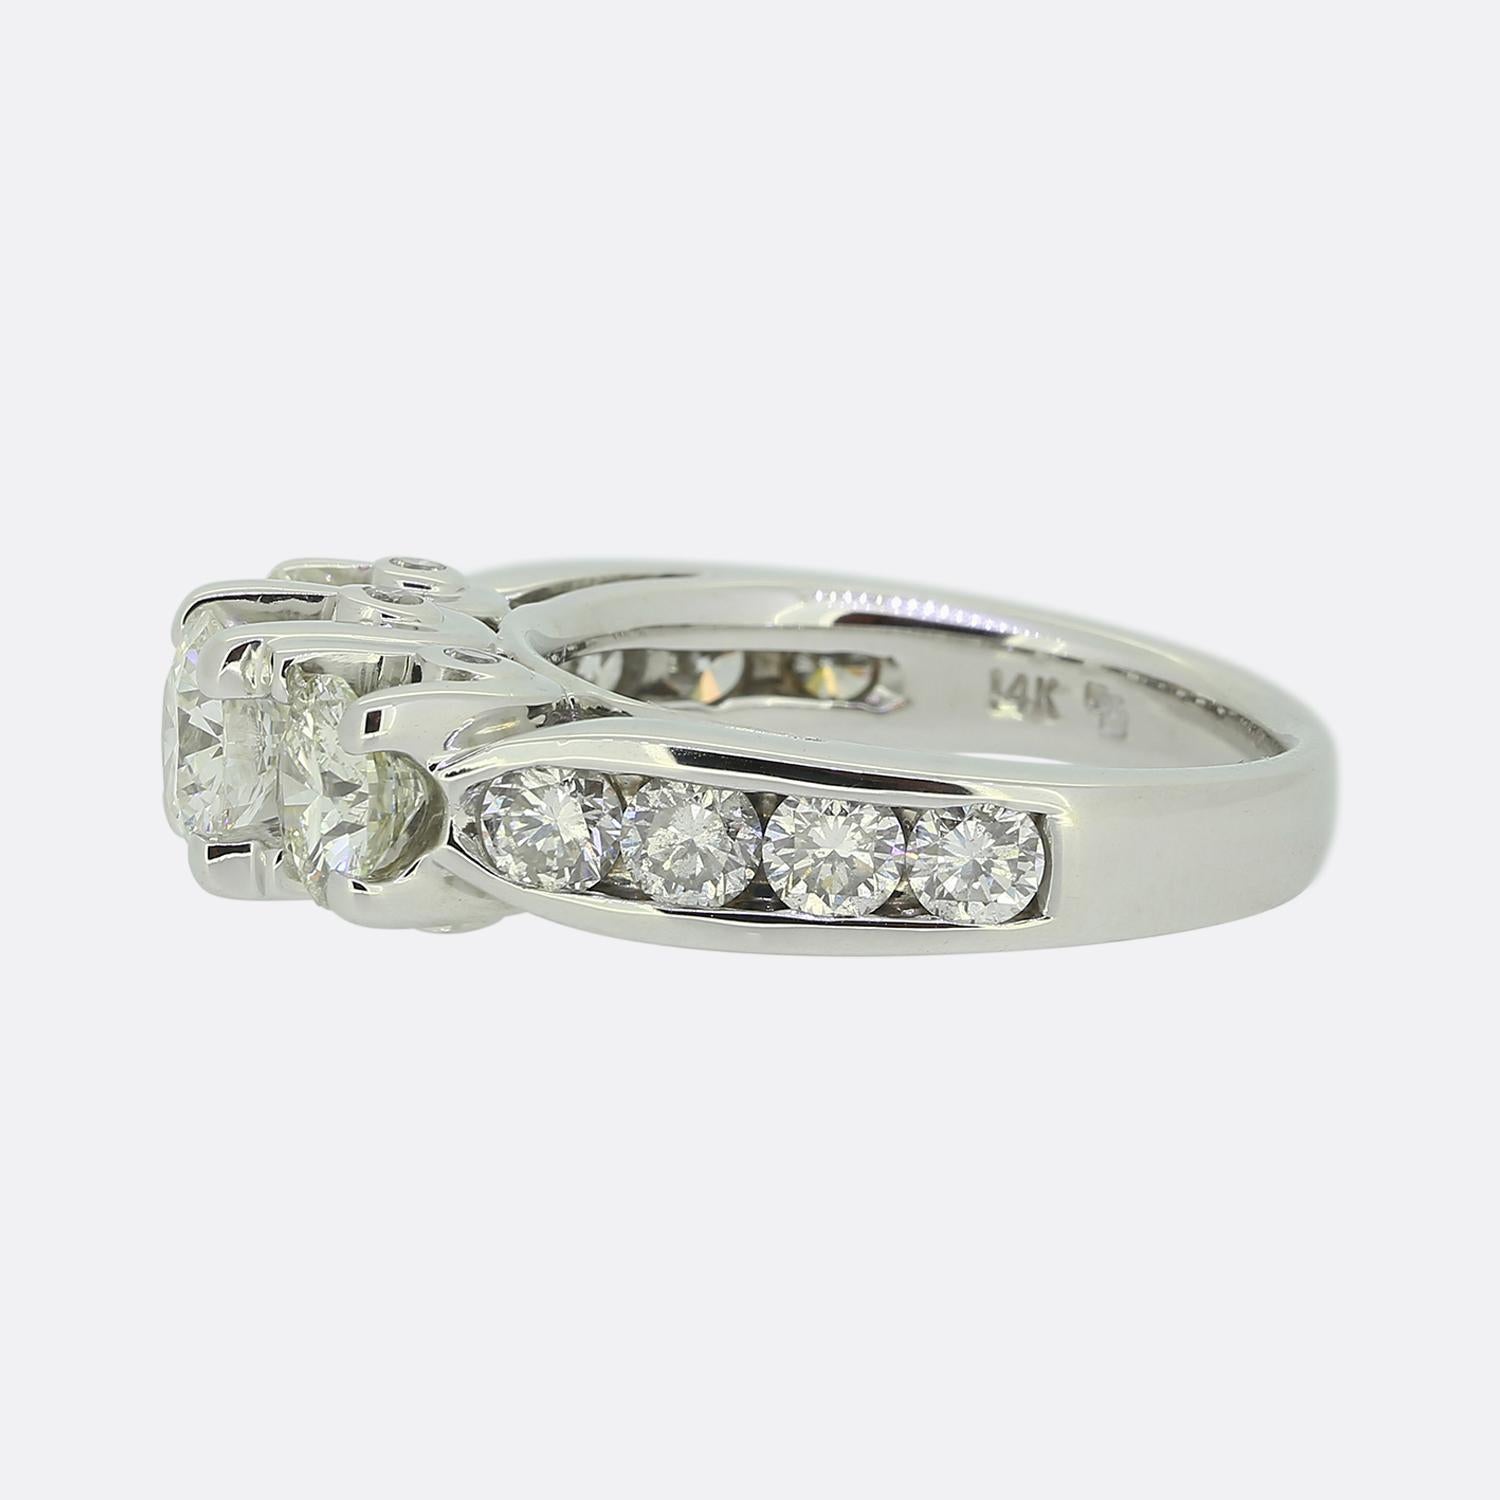 Here we have a wonderful three-stone diamond ring. A trio of round brilliant cut diamonds sit proud atop the centre of the face; the largest of which is slightly risen at the centre. The expertly crafted open claw settings allow for the full shape